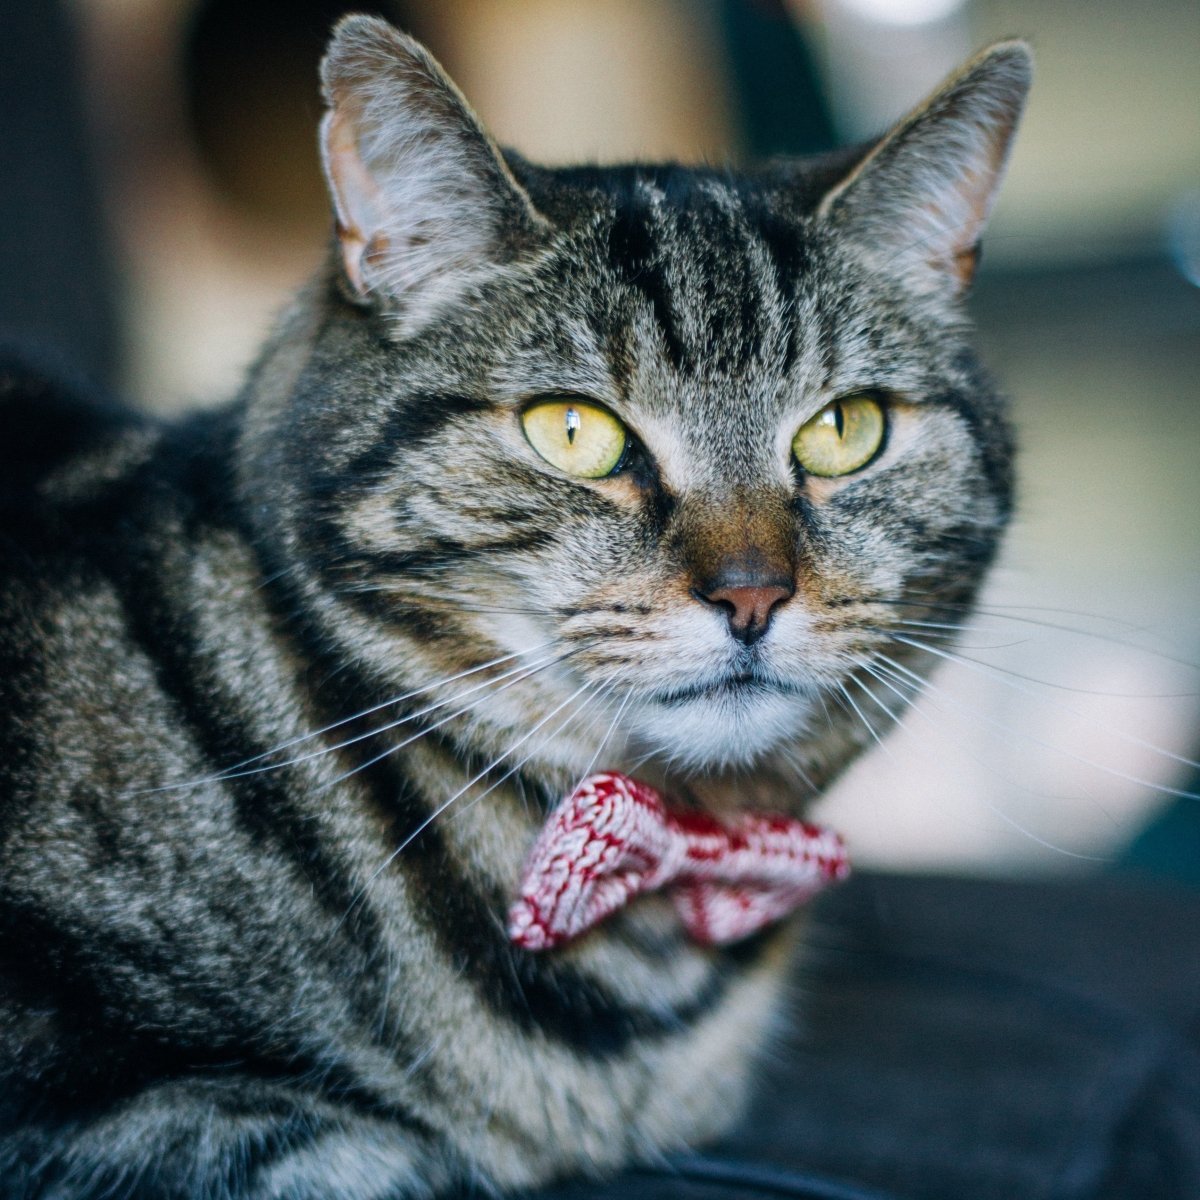 Cat Bow Tie (4 colours available) - Wool & Water